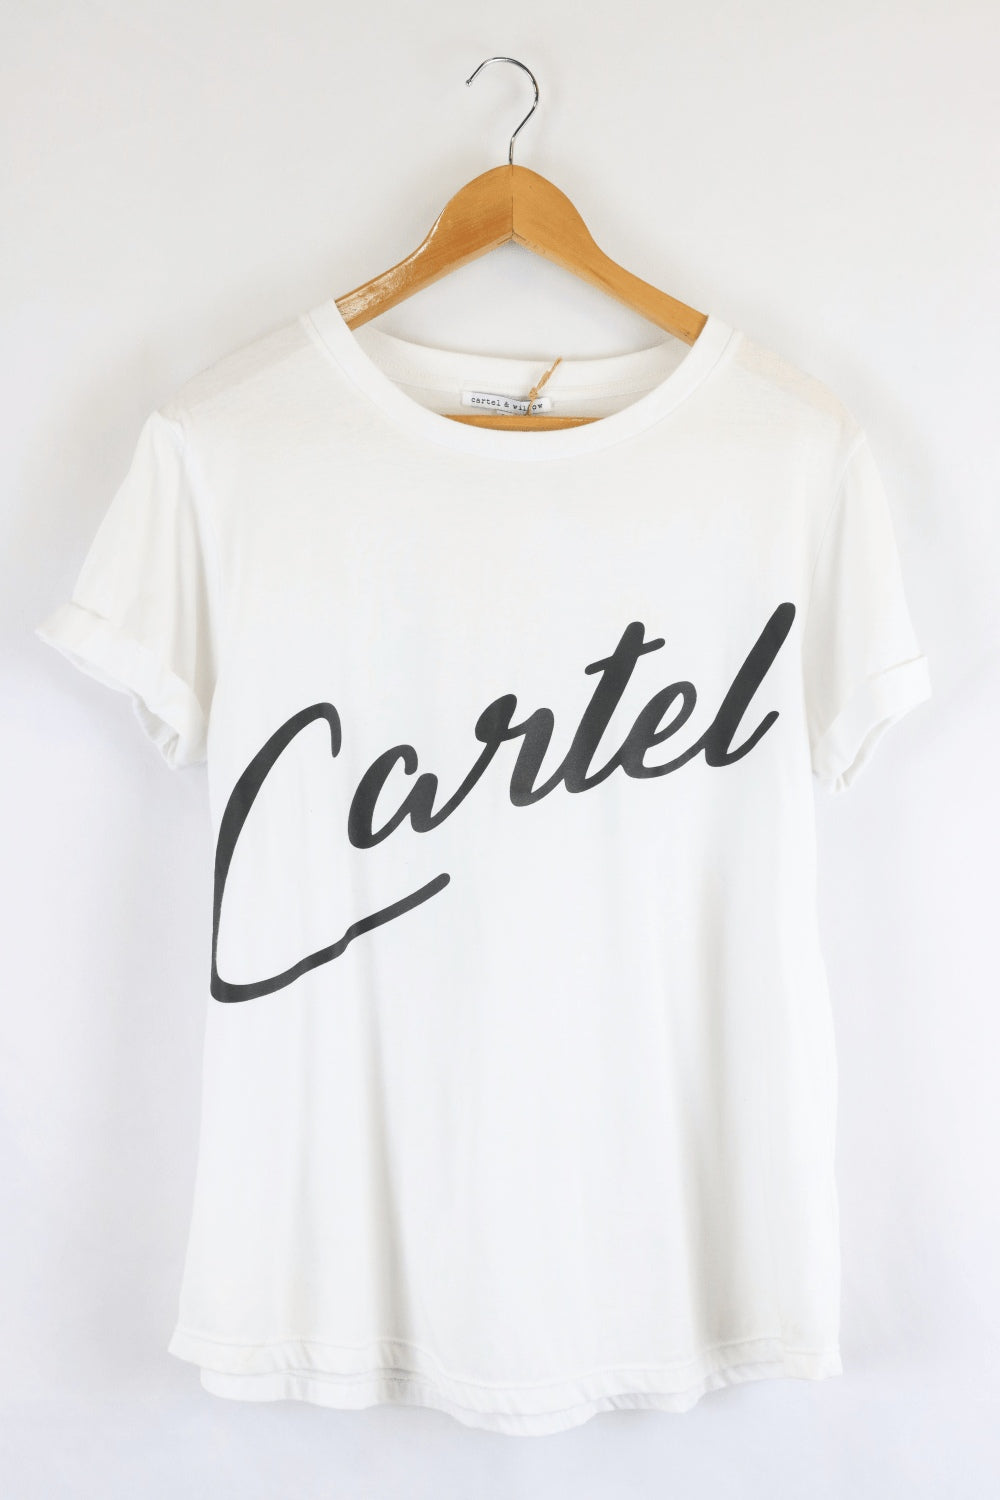 Cartel and Willow White T Shirt M